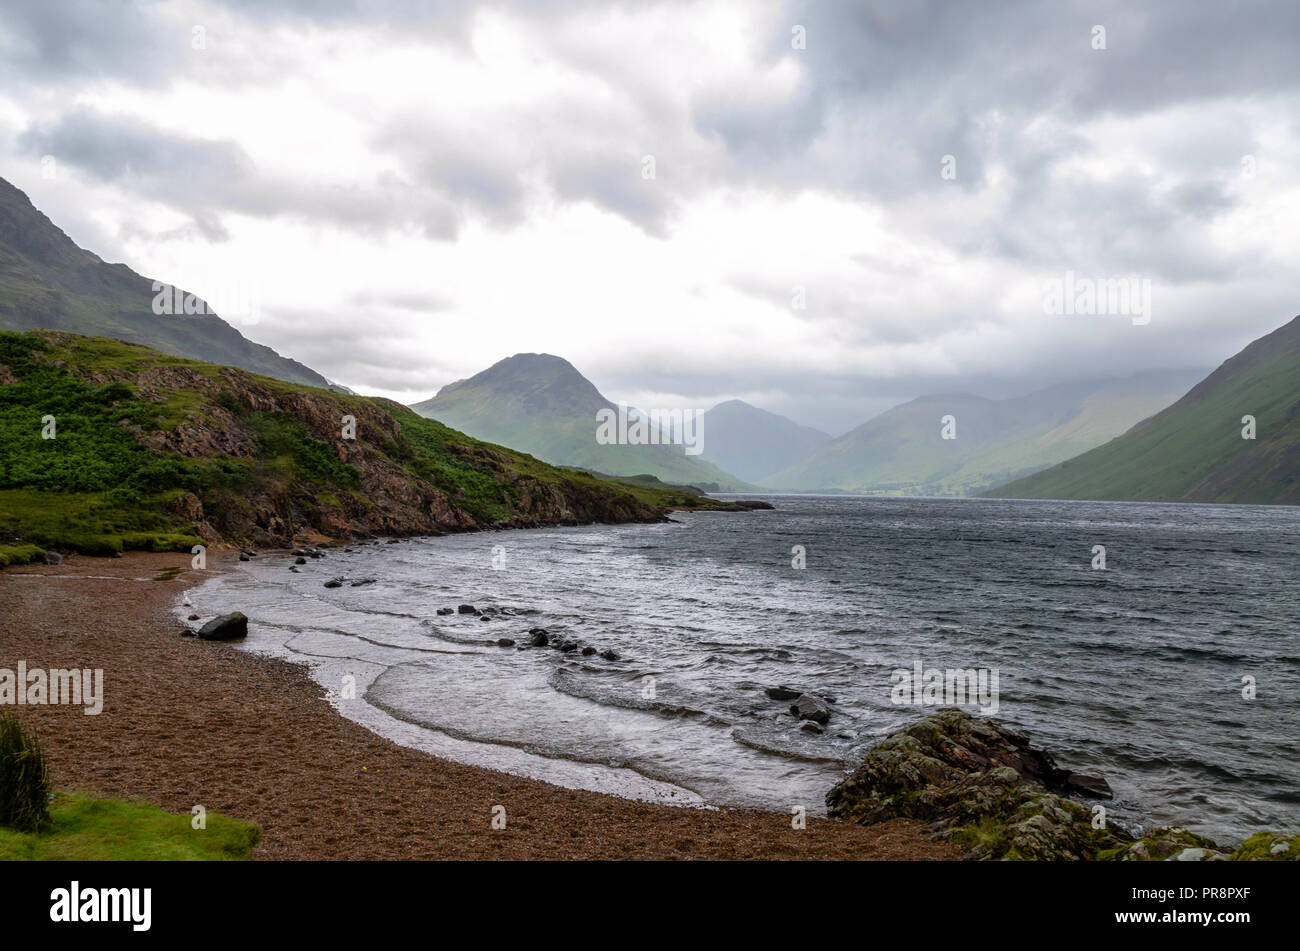 The Wast Water Lake on a rainy day in the Lake District, Cumbria, UK Stock Photo